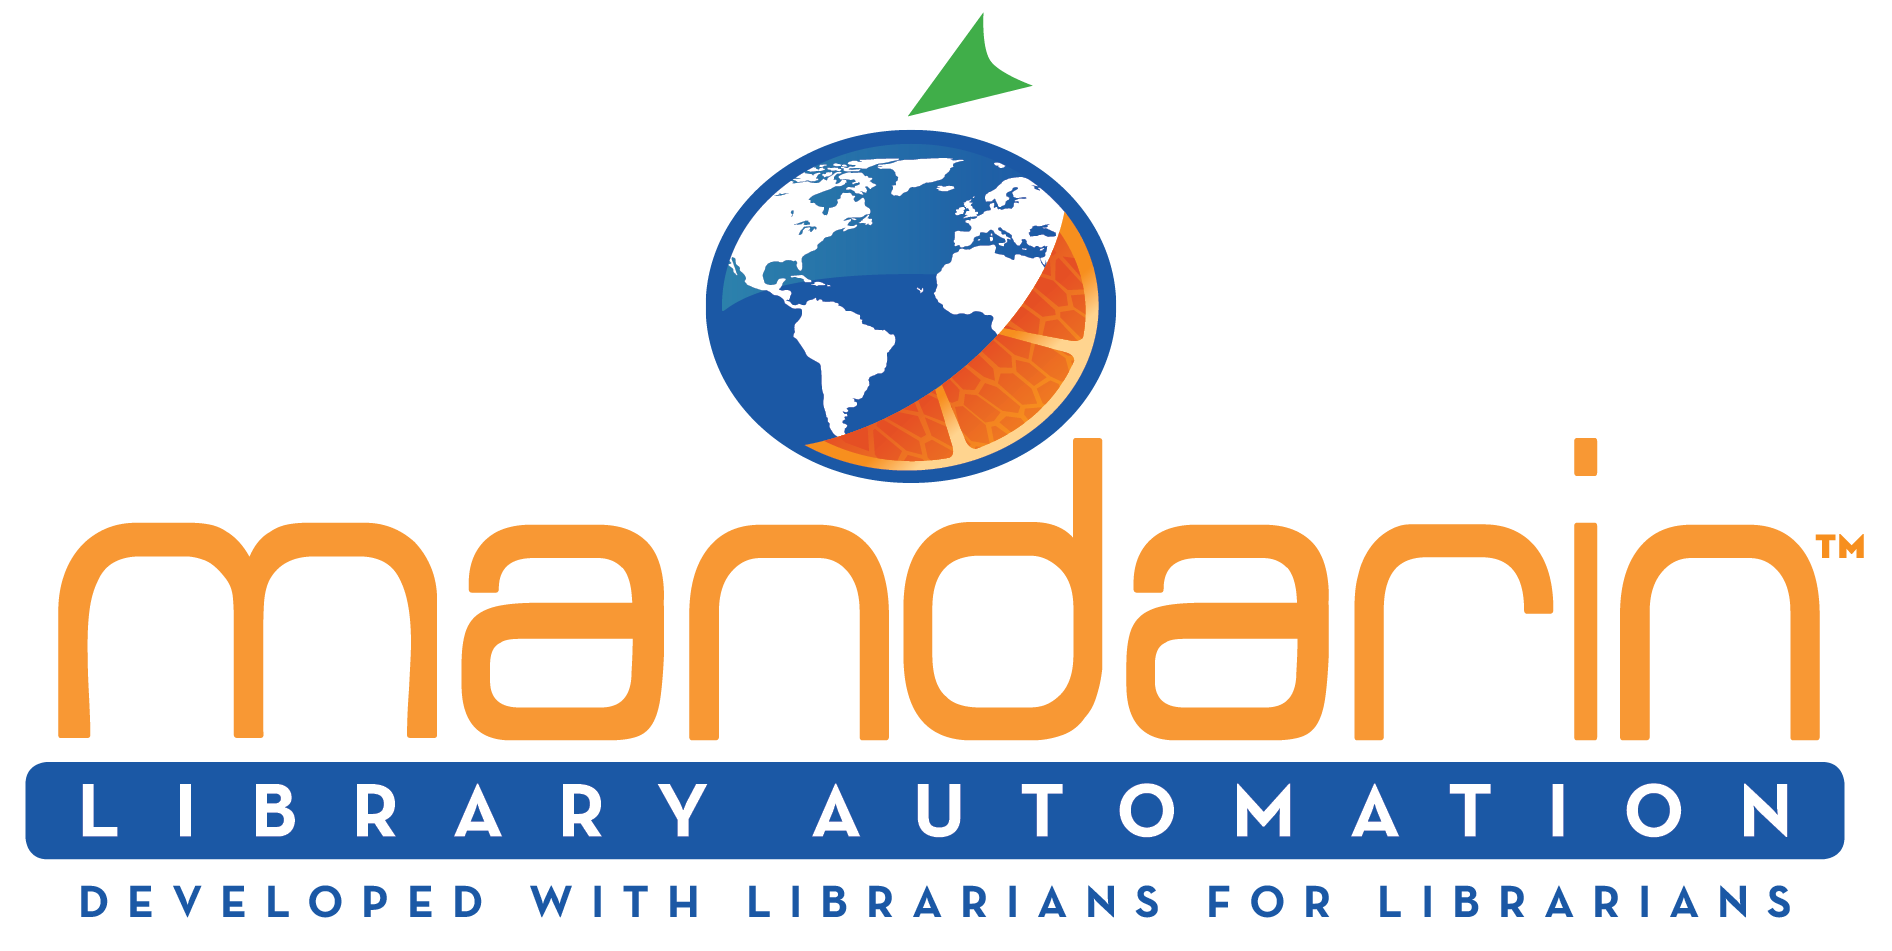 Mandarin Library Automation Developed with Librarians for Librarians